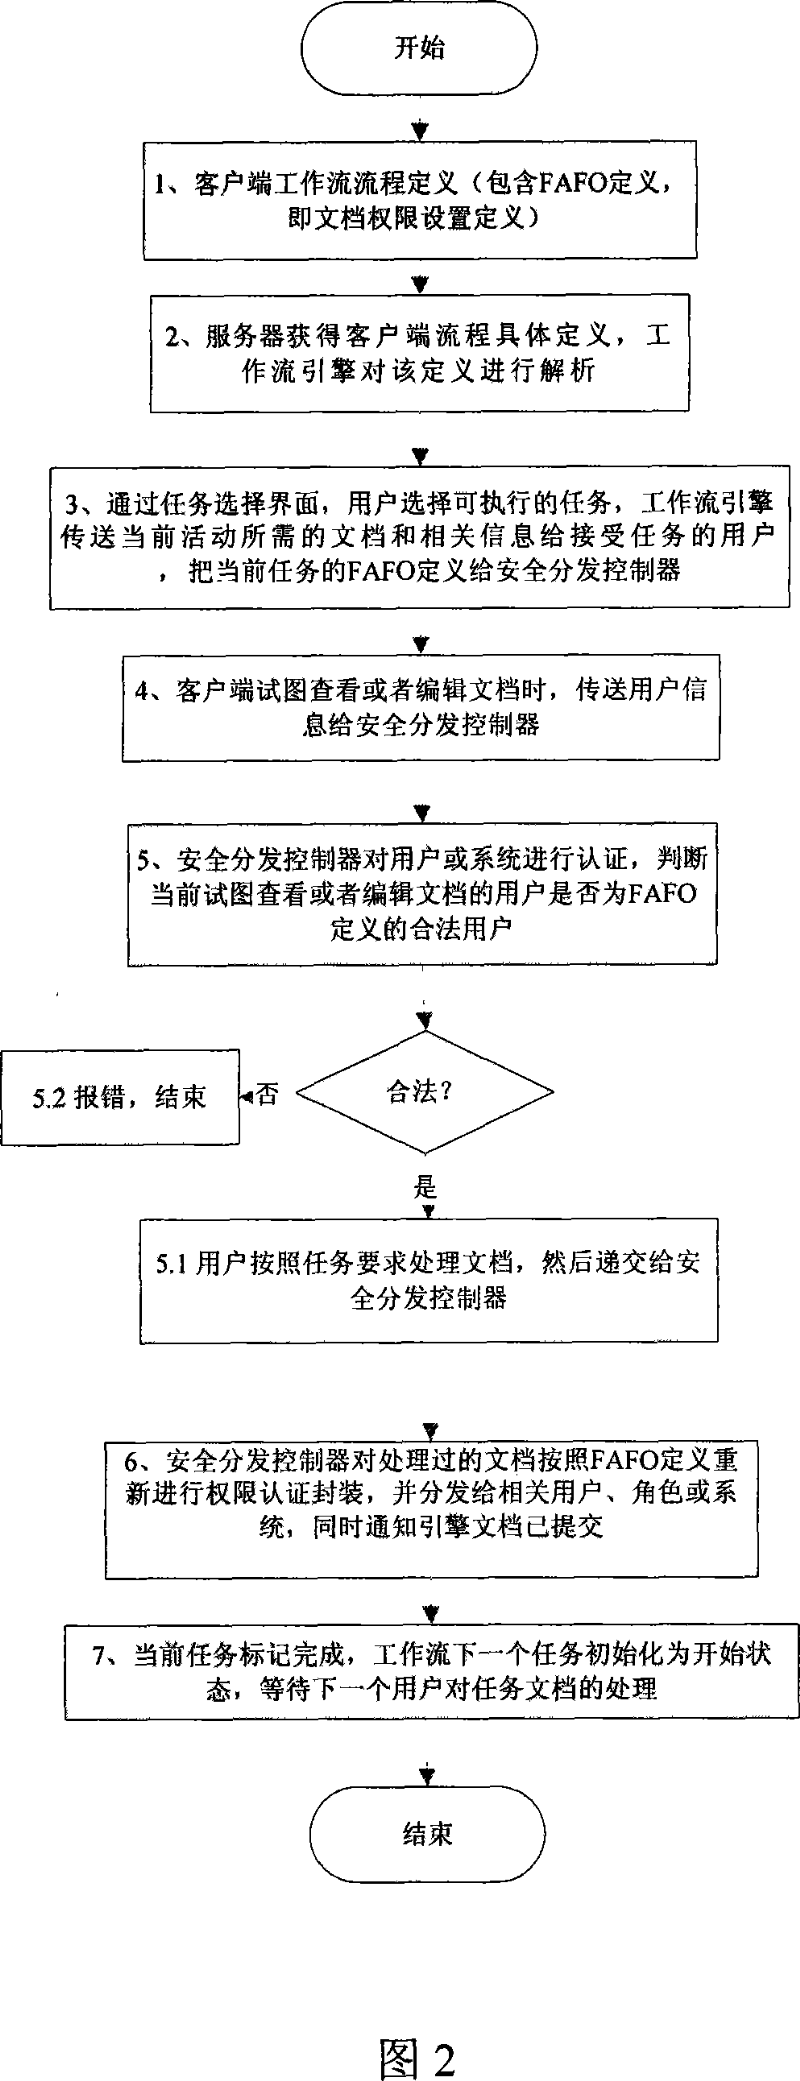 Electronic document safety distribution controlling method based on task stream